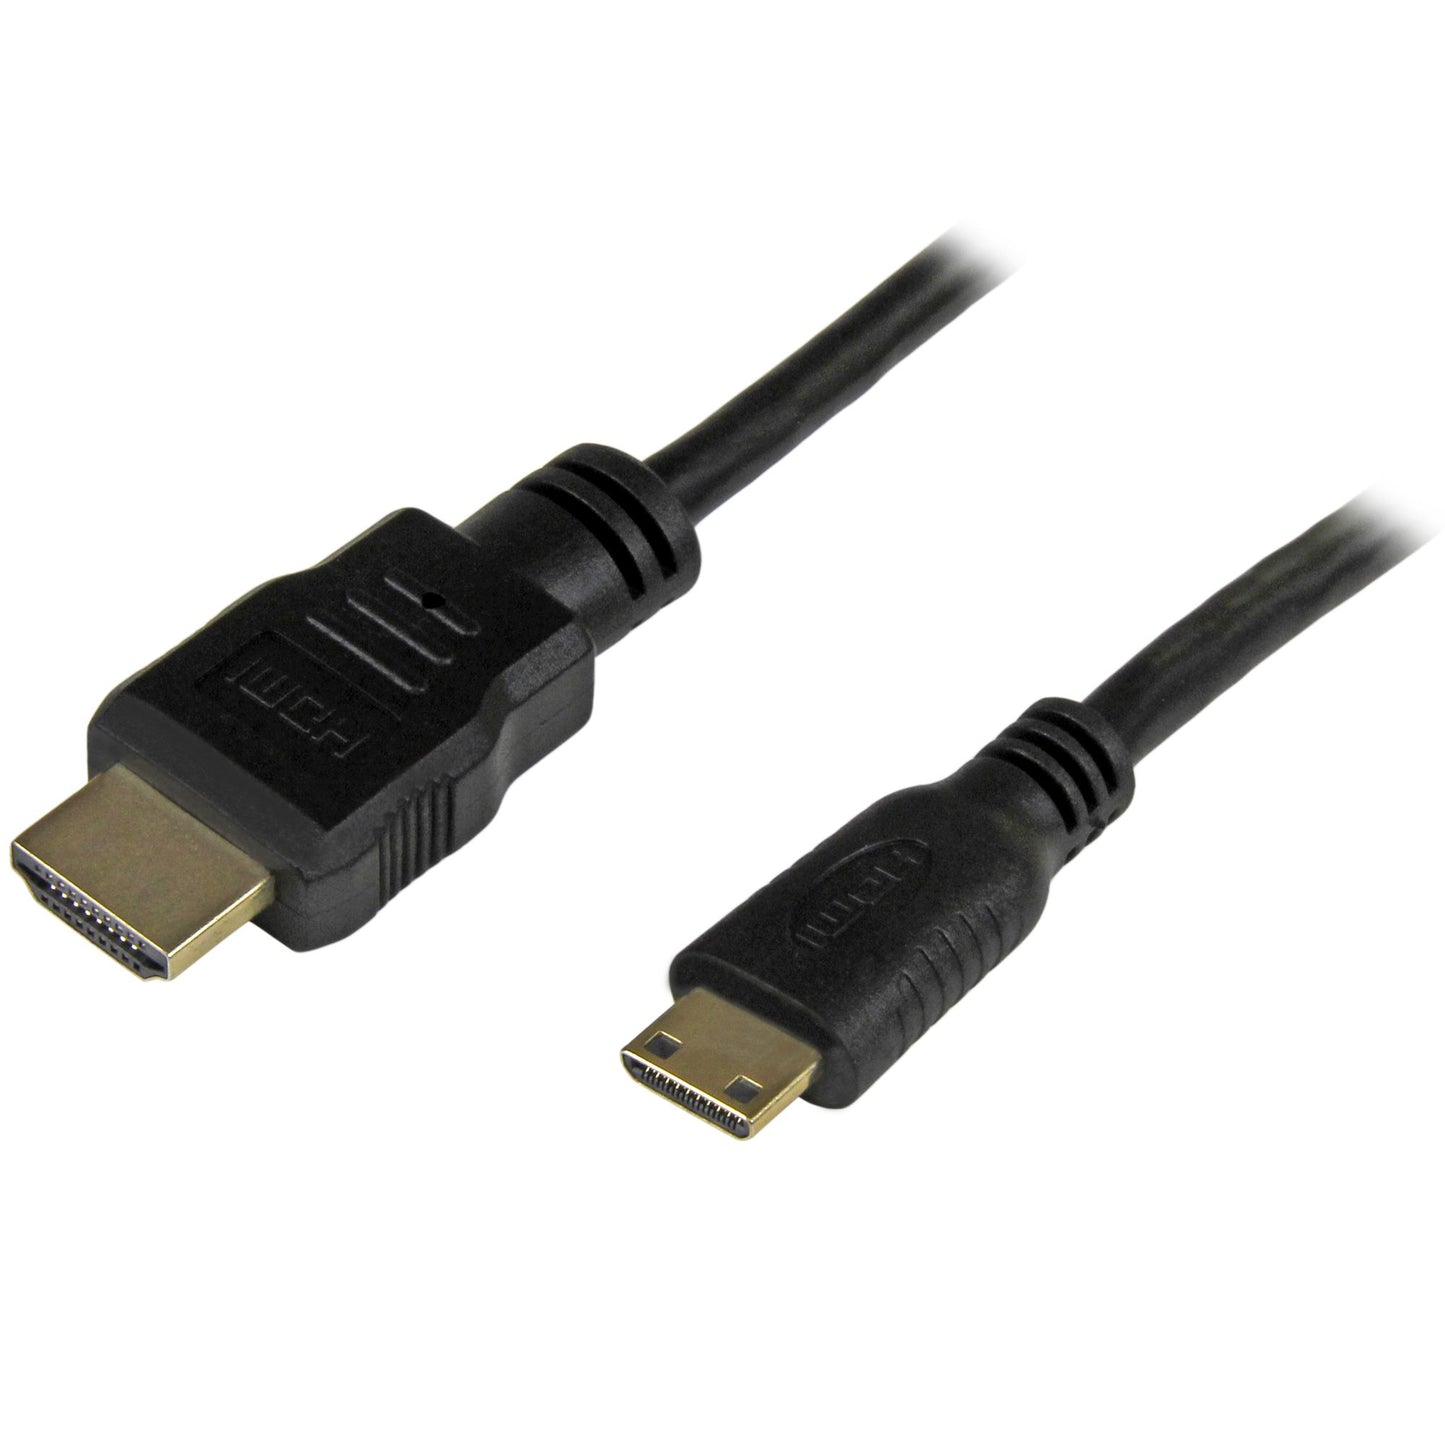 6ft Mini HDMI to HDMI Cable with Ethernet - 4K 30Hz High Speed Mini HDMI to HDMI Adapter Cable